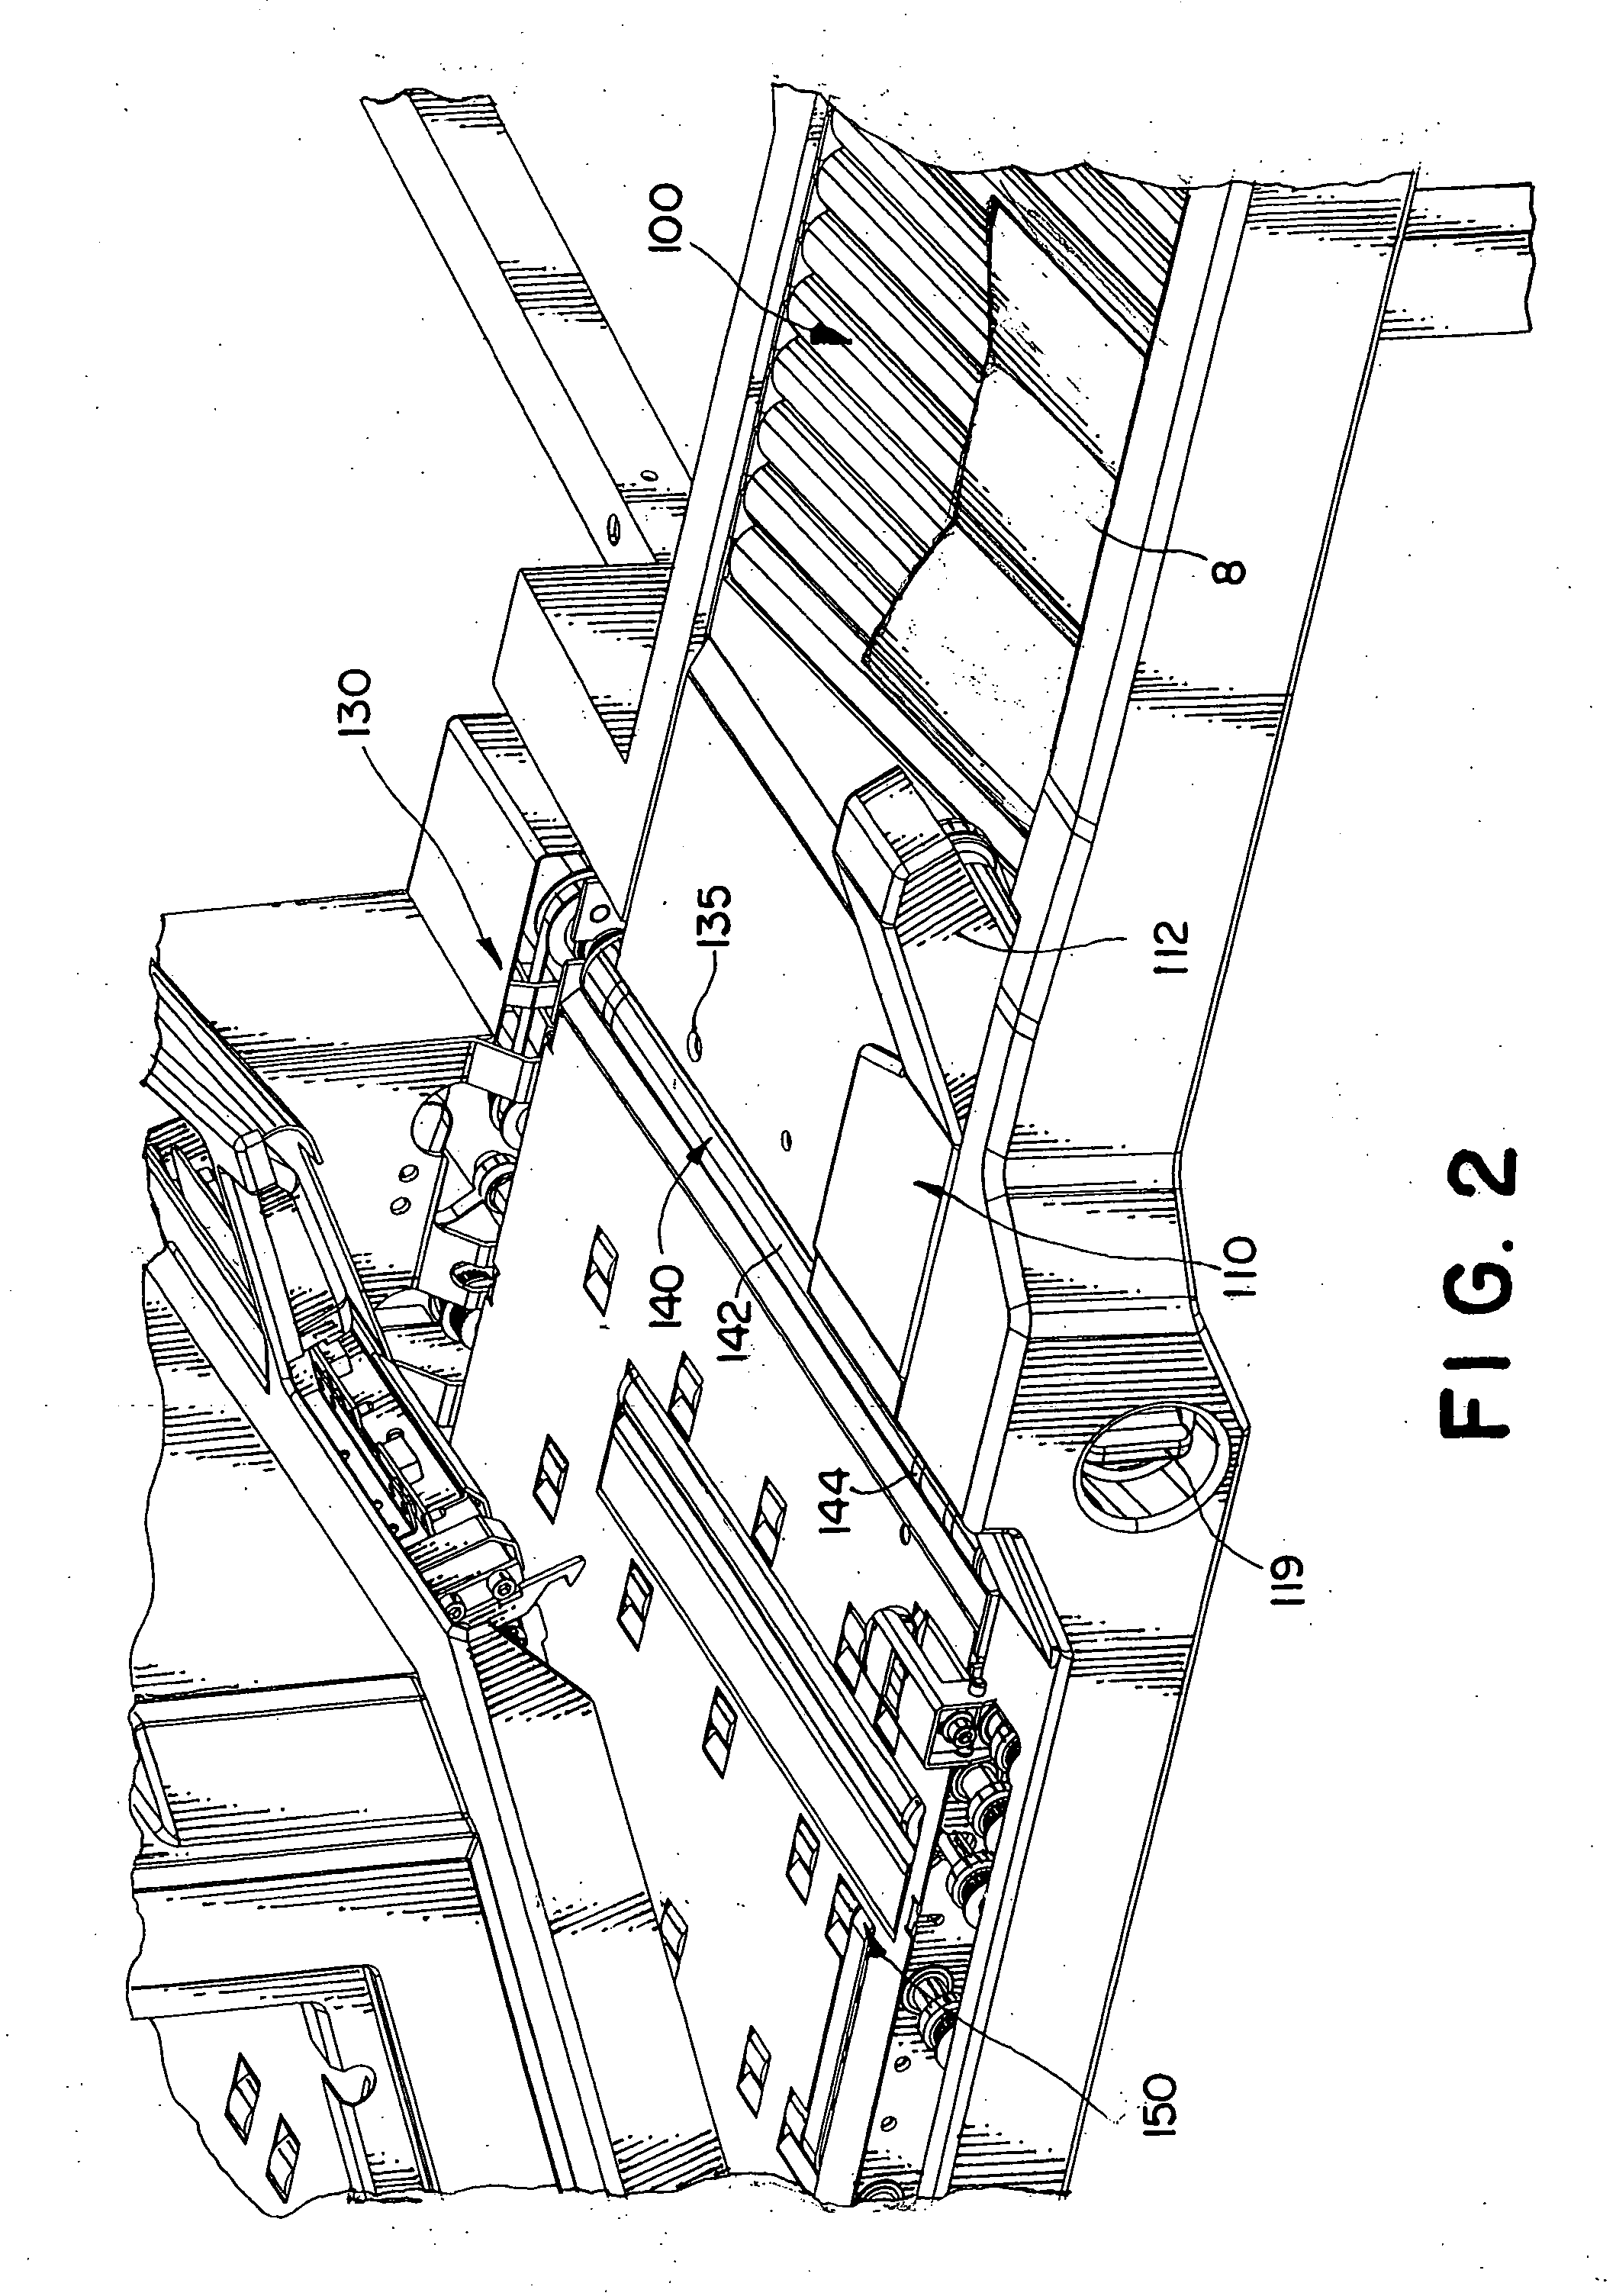 Method and apparatus for processing mail to obtain image data of contents